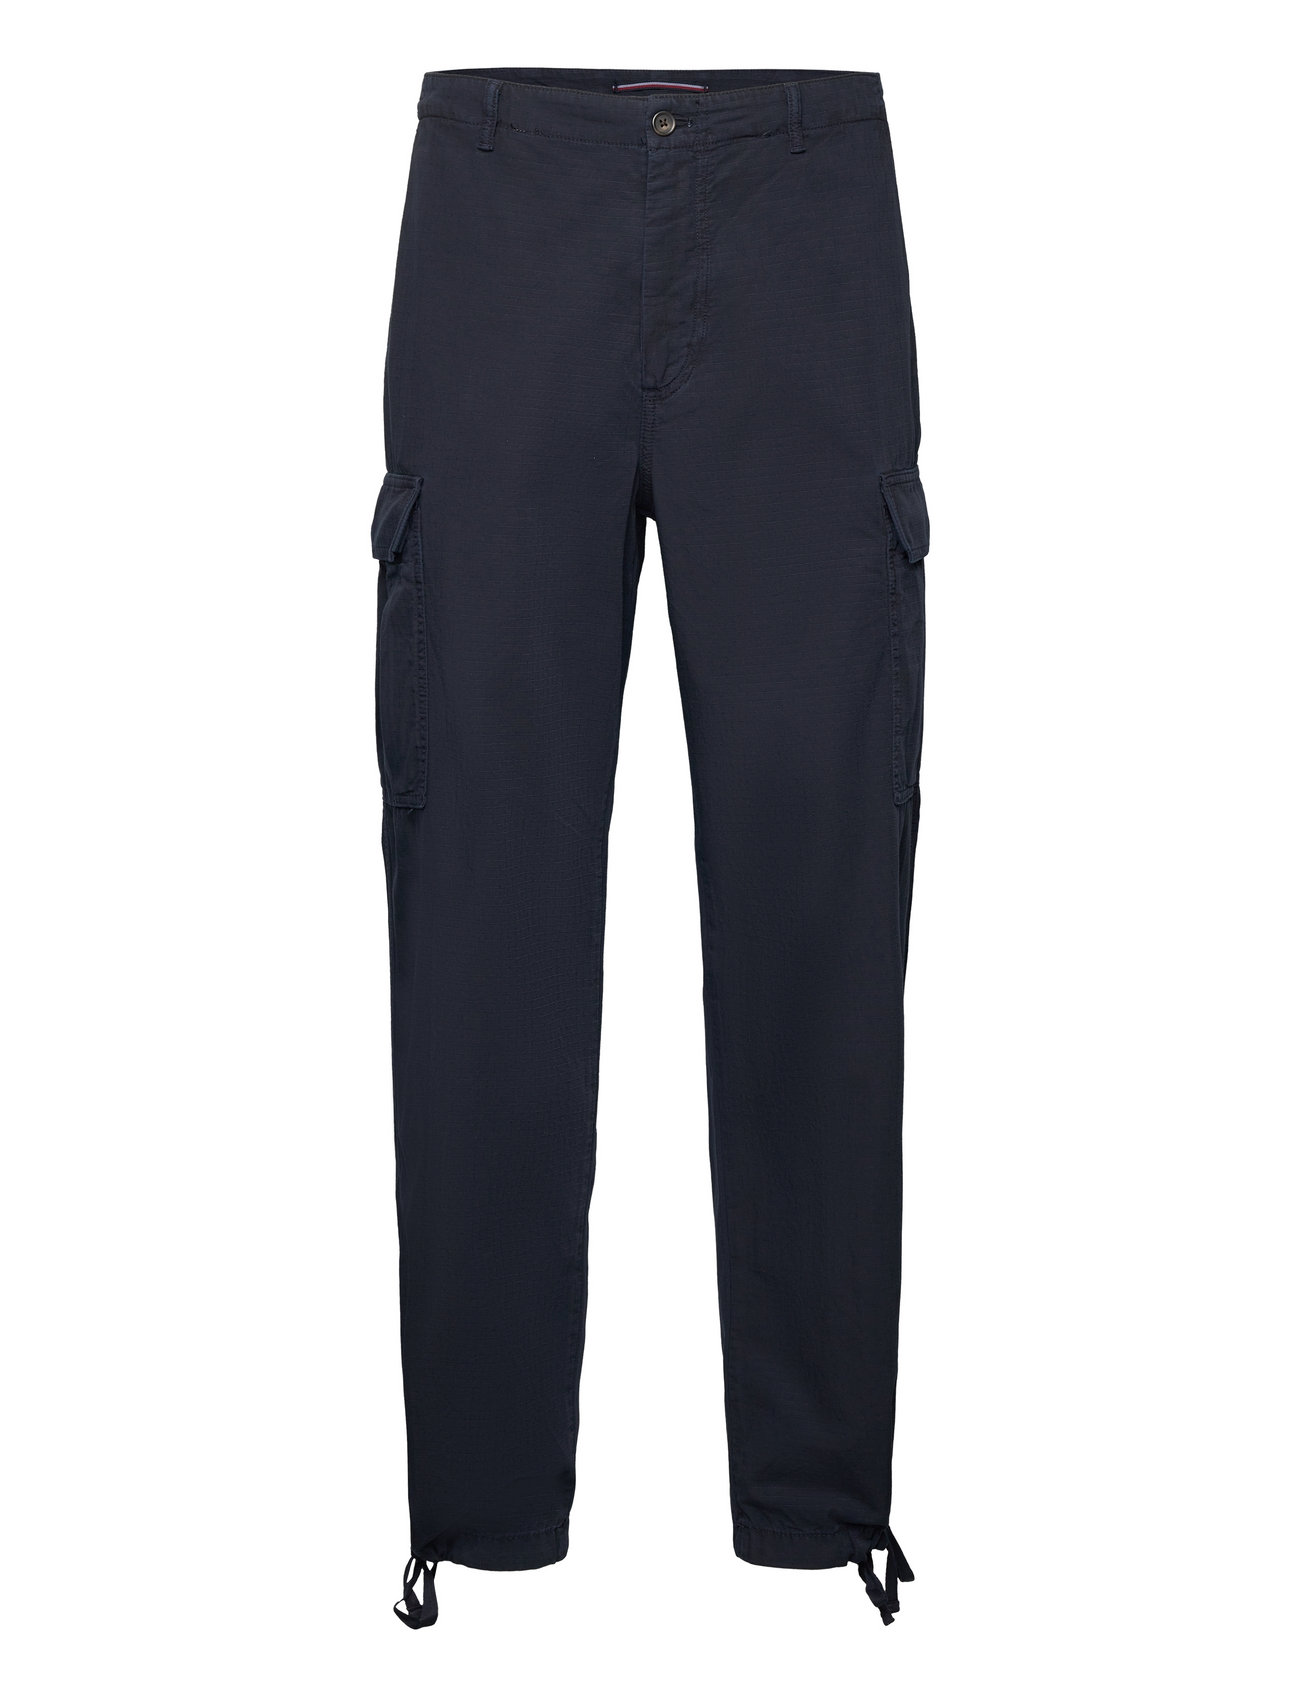 Tommy Hilfiger Murray Cargo Ribstop Gmd - Cargo pants - Boozt.com